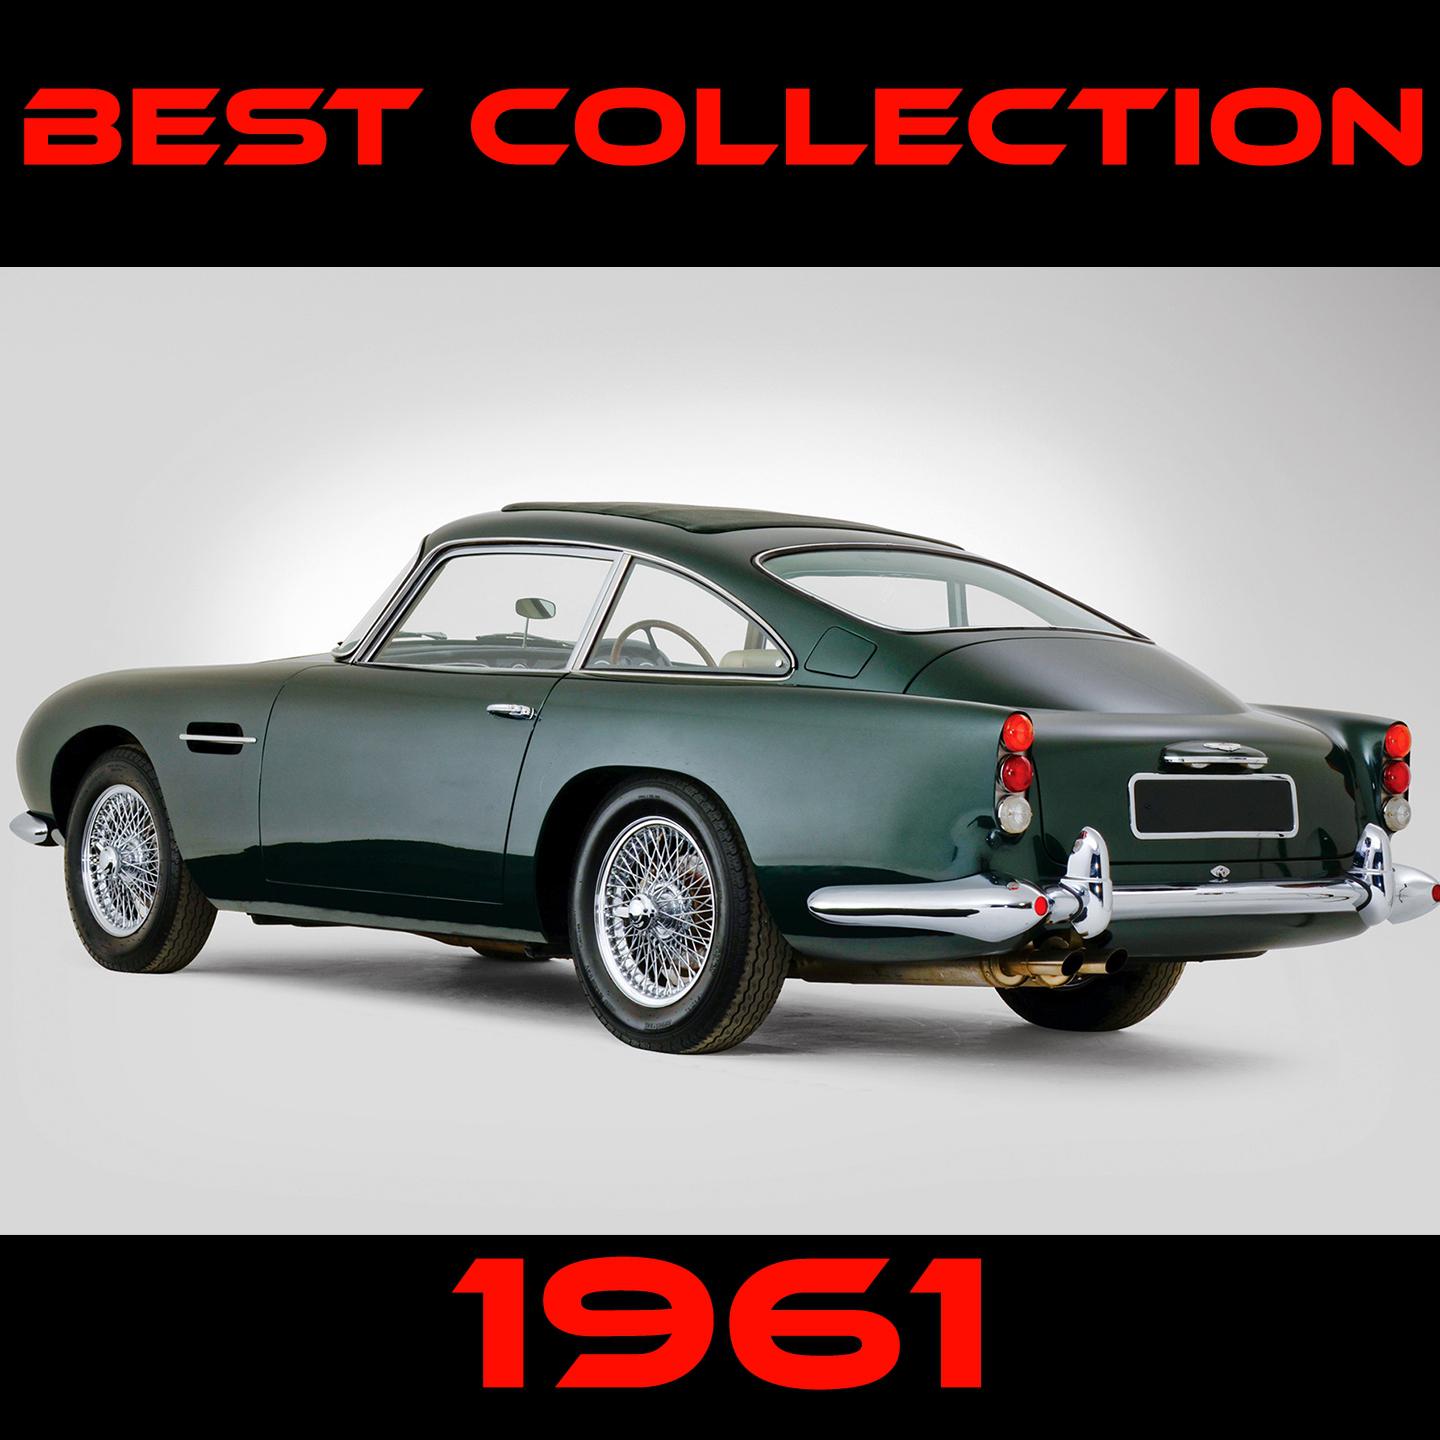 1961 (Best Collection)